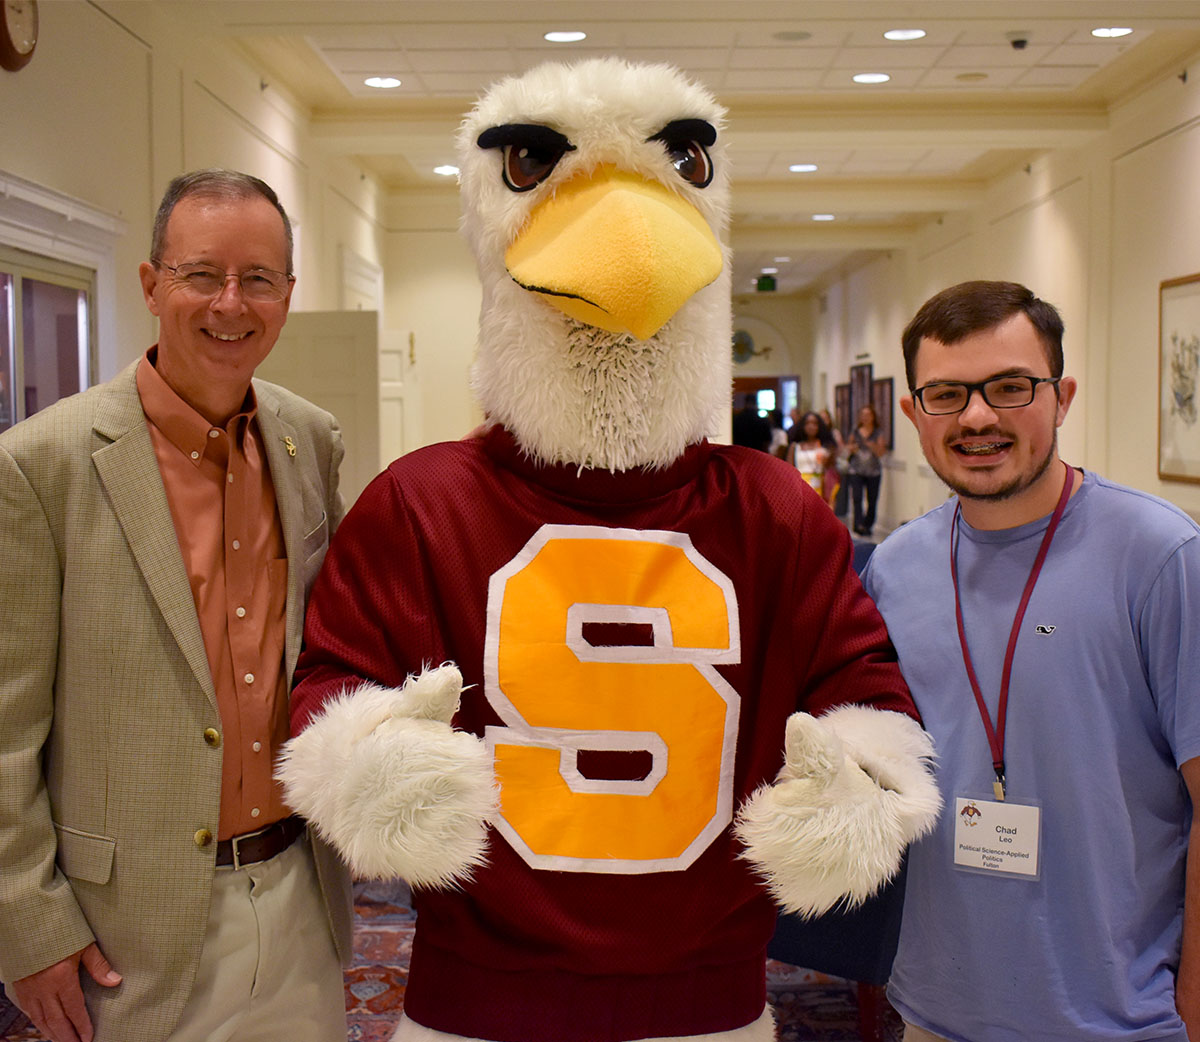 SU President Charles Wight with Sammy the Sea Gull and SU Student Chad Leo